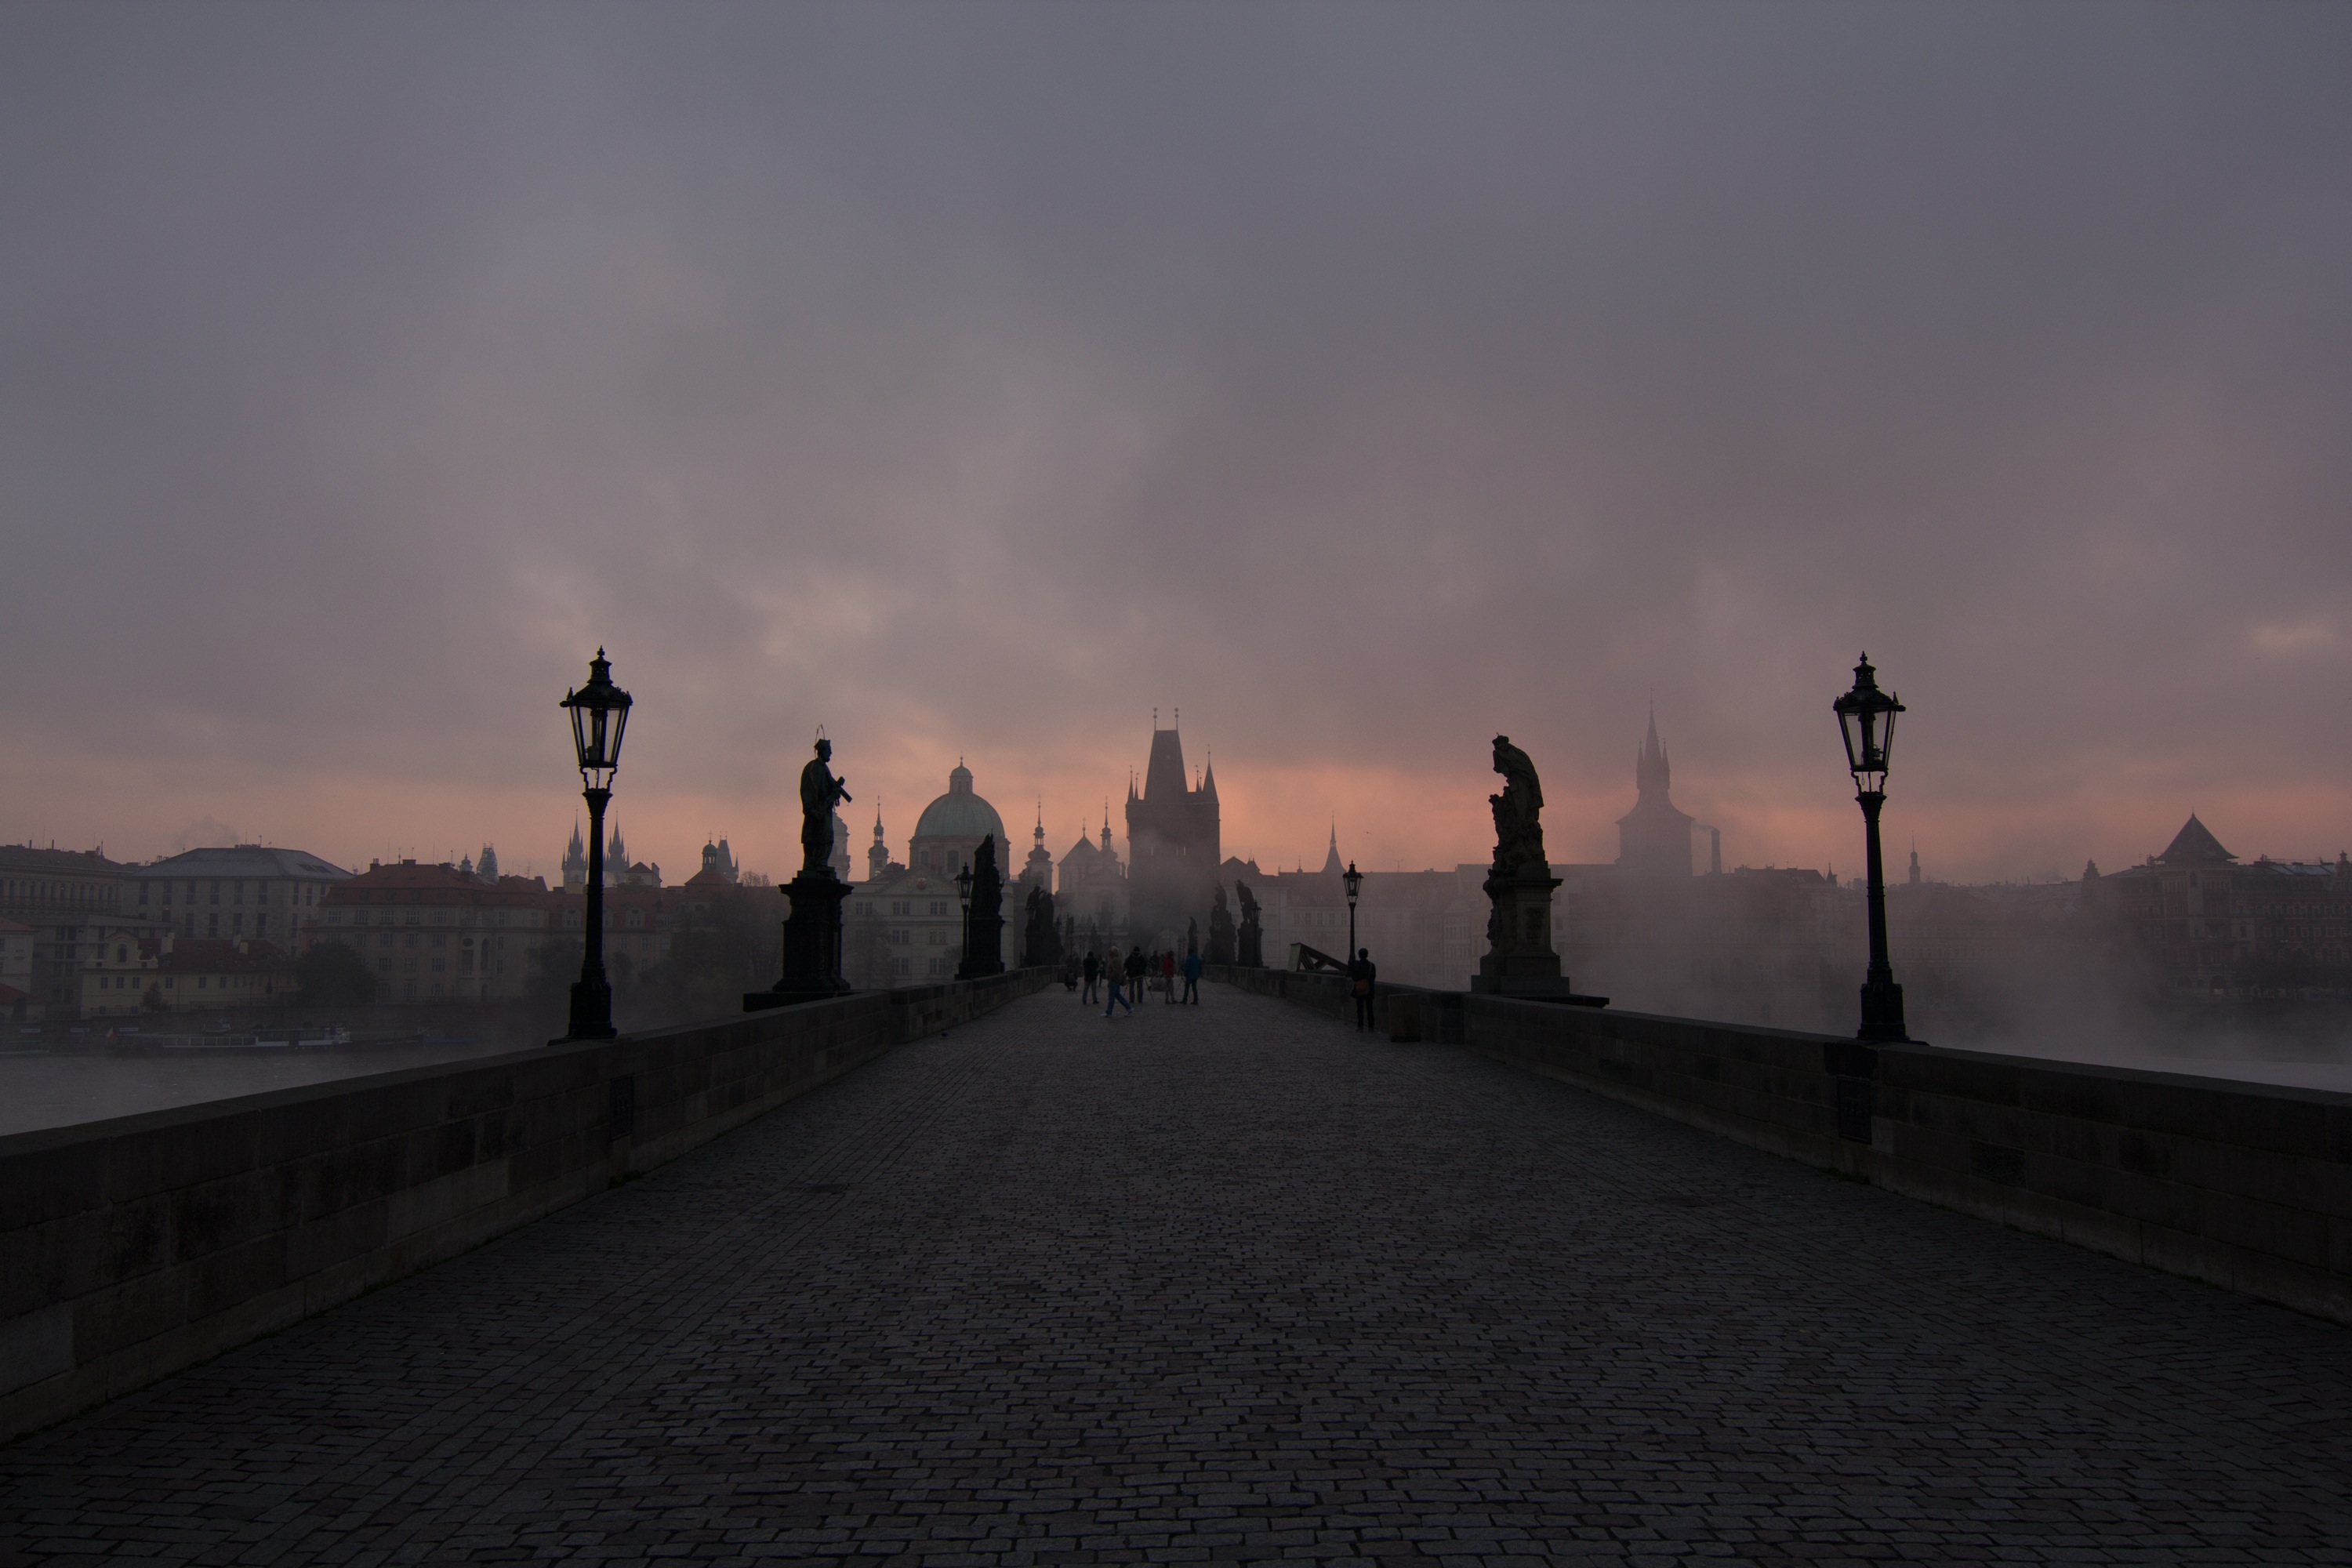 Charles bridge during low season can look like this. But usually only in the morning:)